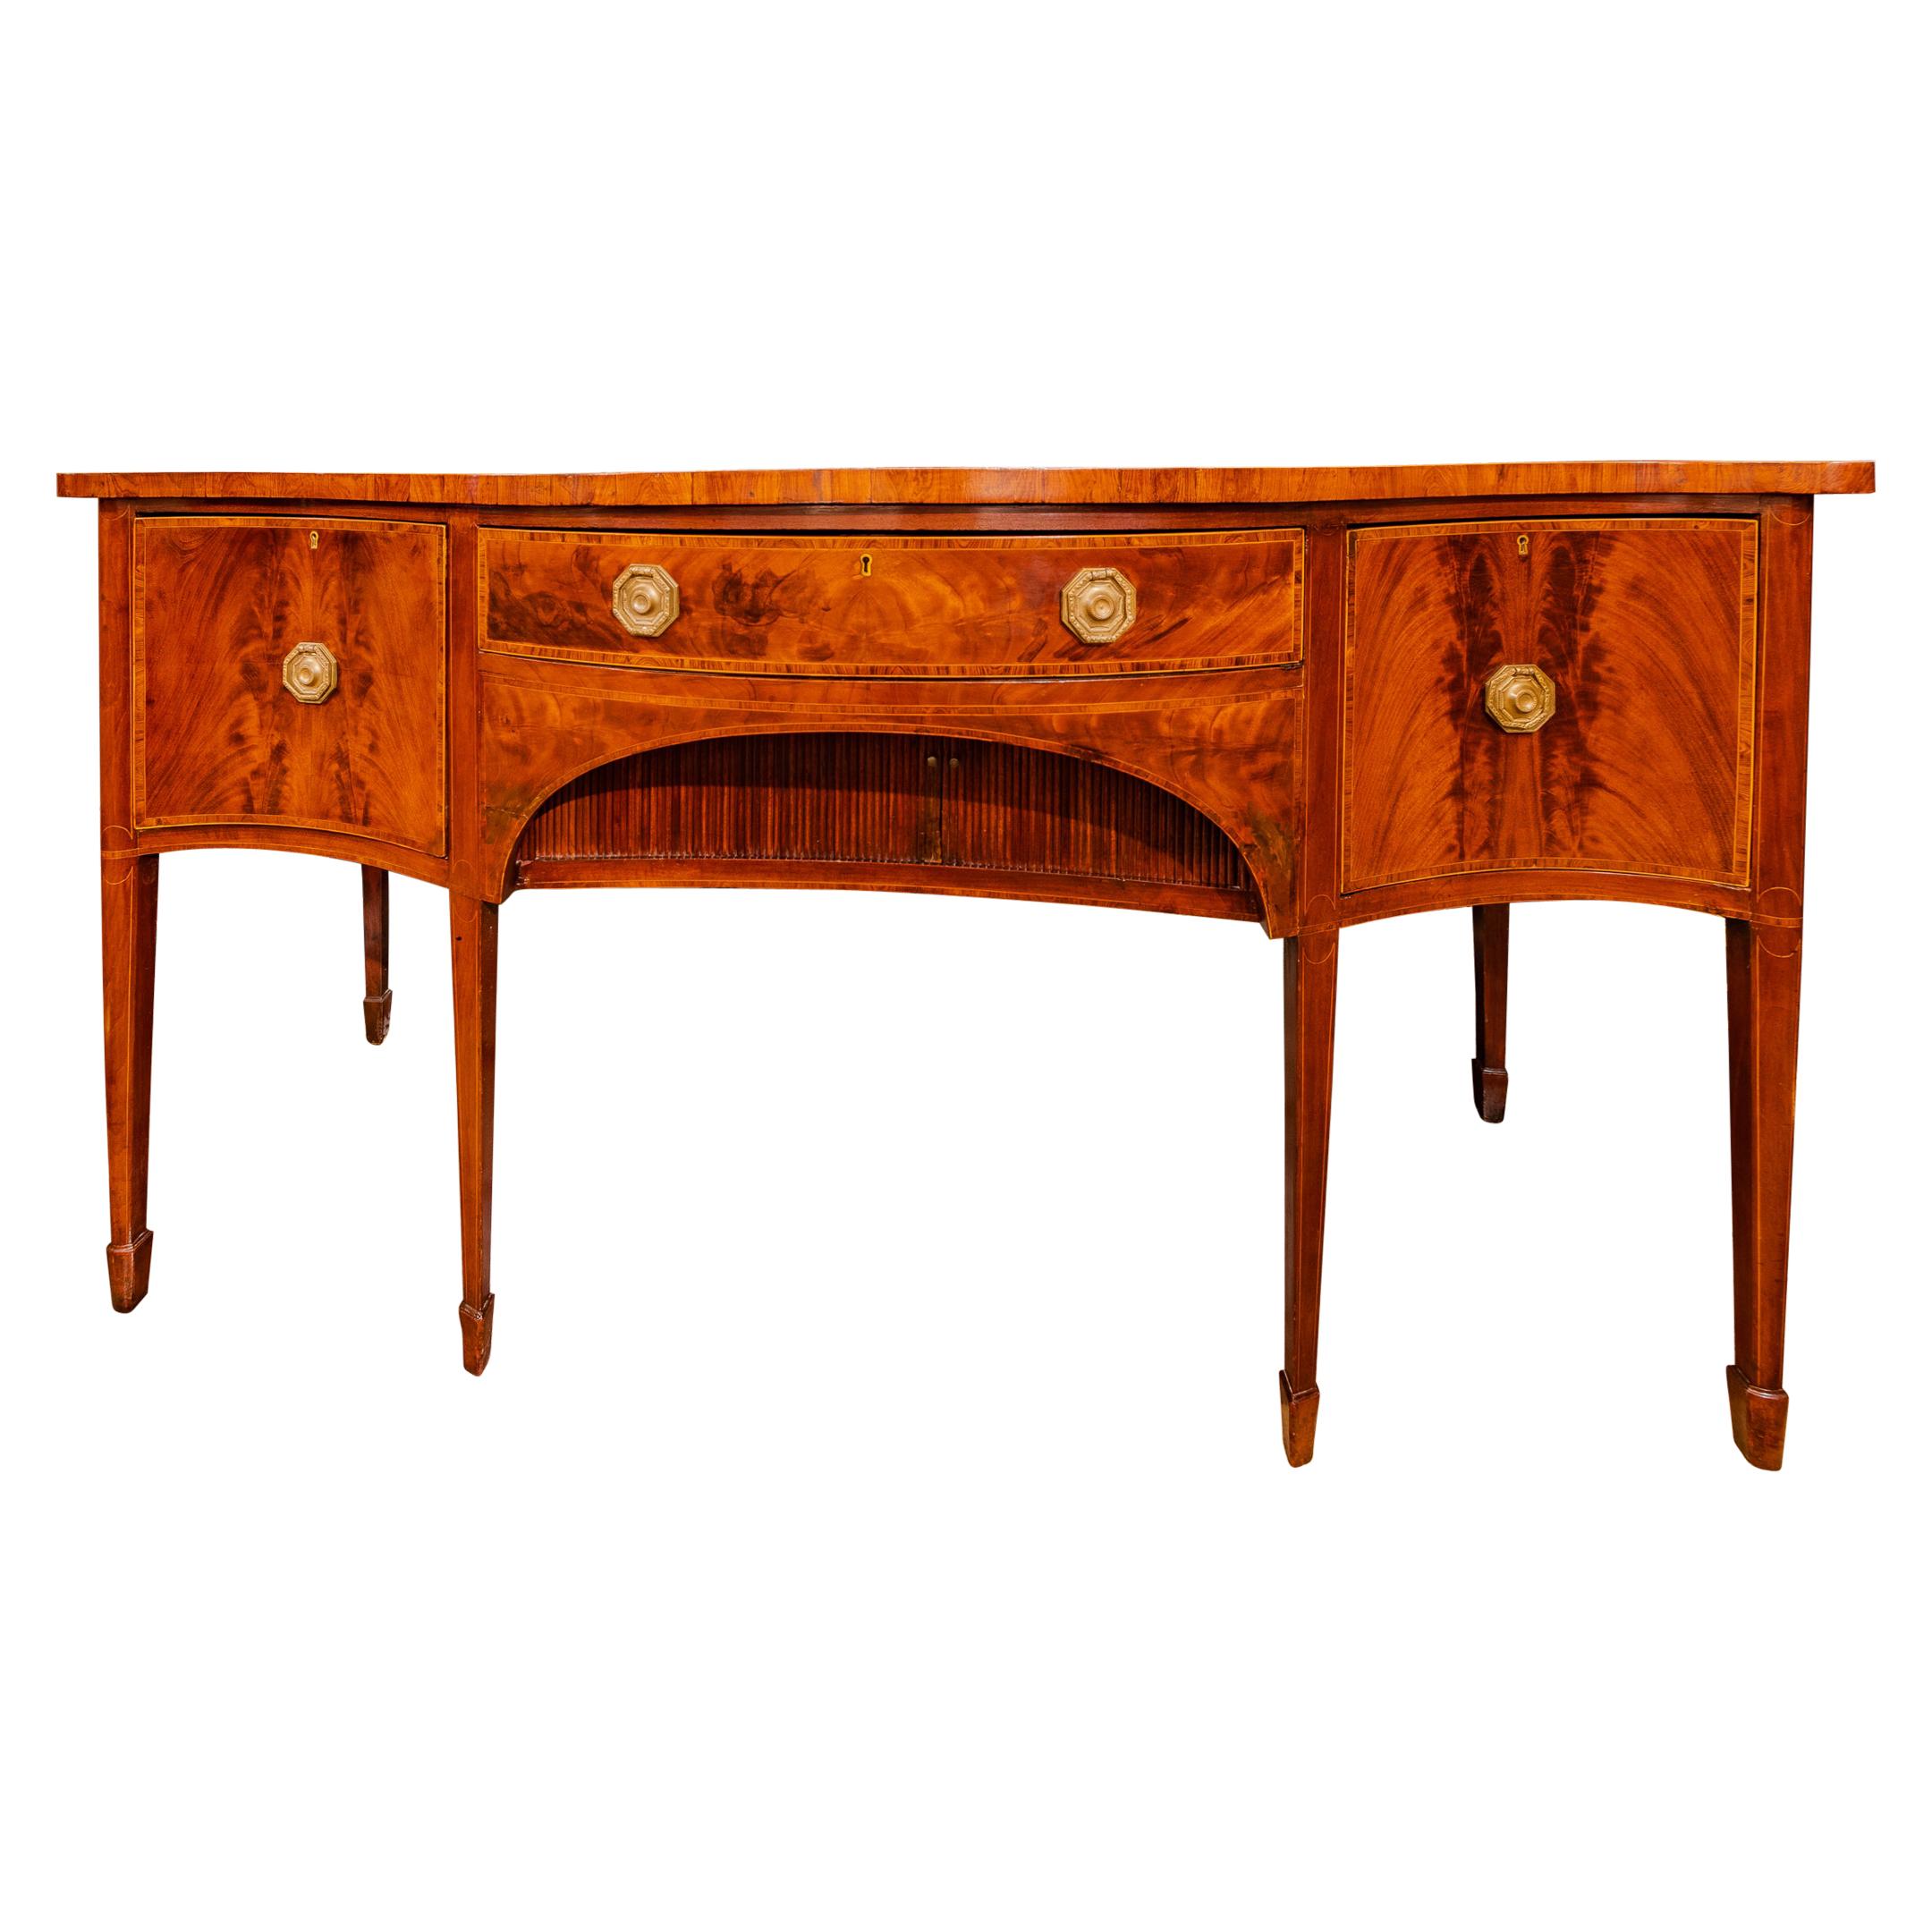 Regency Period Flame Mahogany and Rosewood Inlayed Sideboard